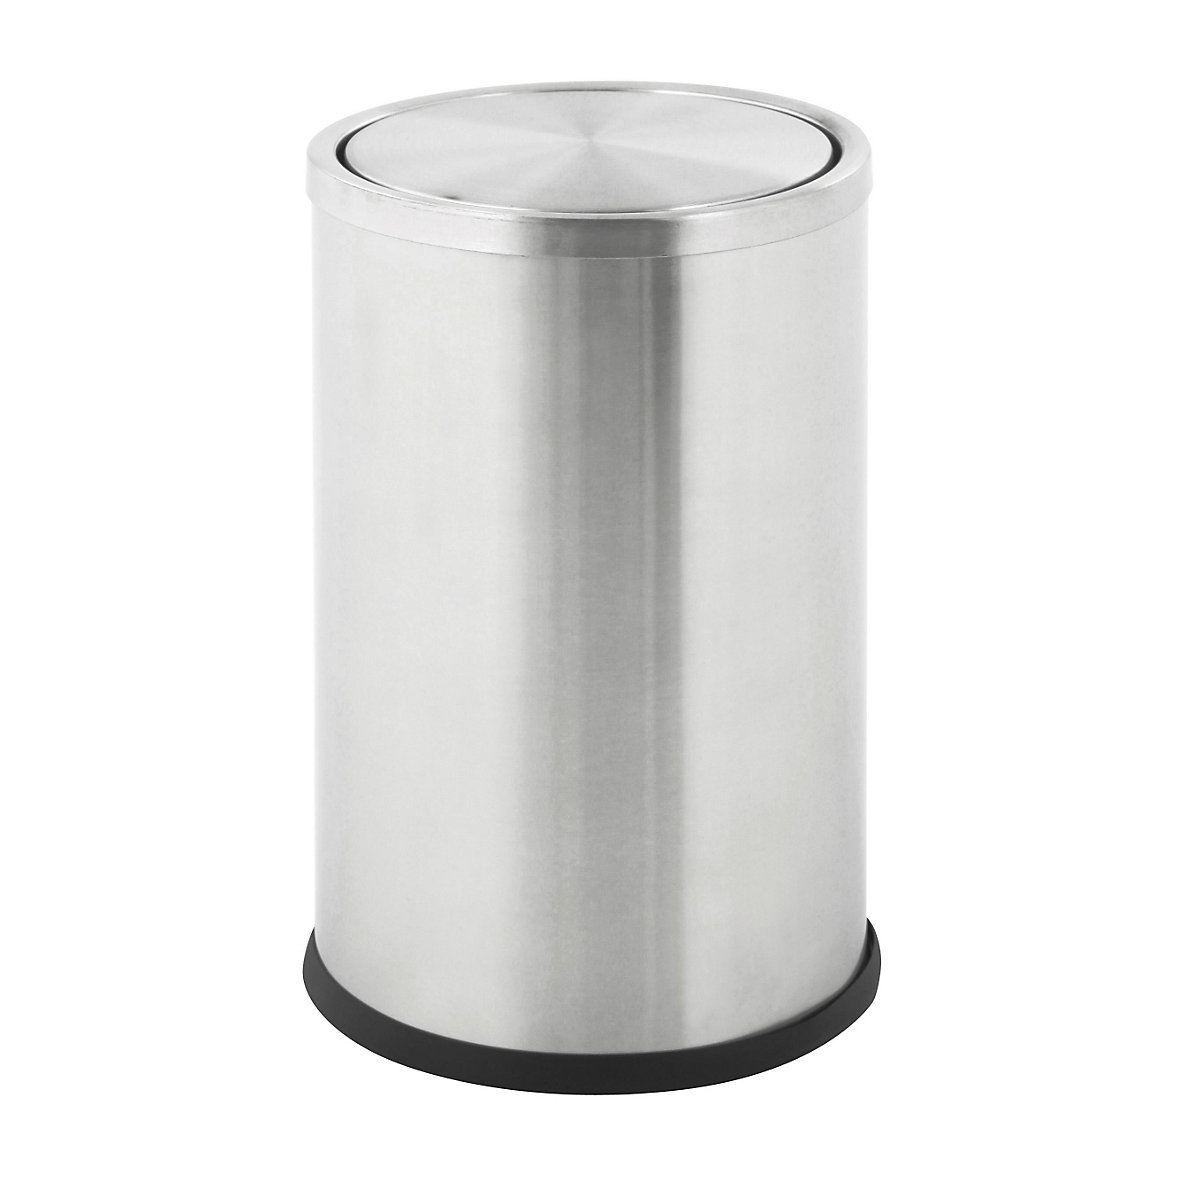 Waste collector with swing lid, capacity 10 l, HxØ 300 x 200 mm, stainless steel, matt finish-1